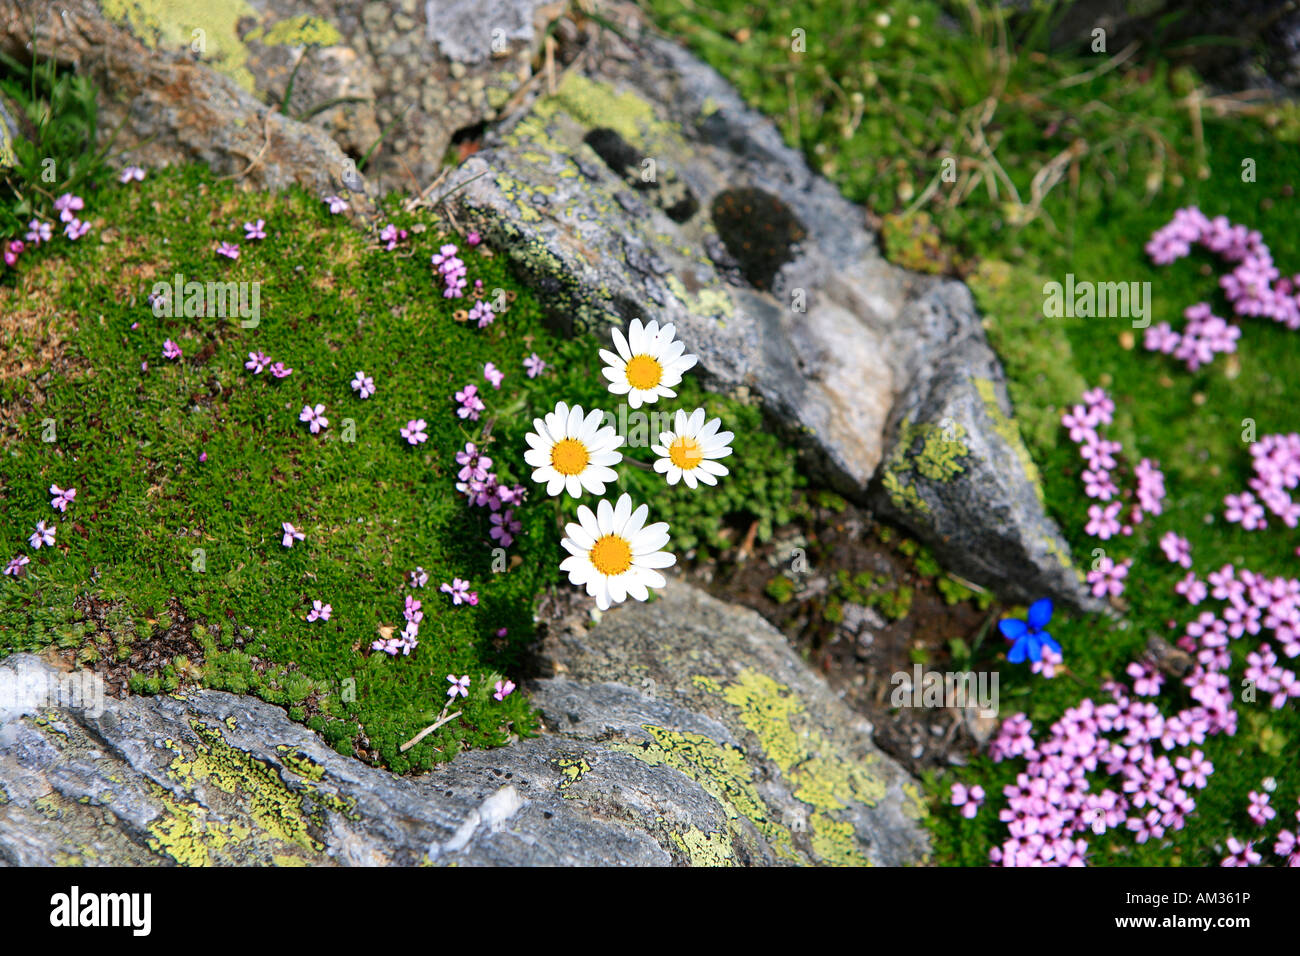 Flowers on moss-covered rocks with lichen Stock Photo